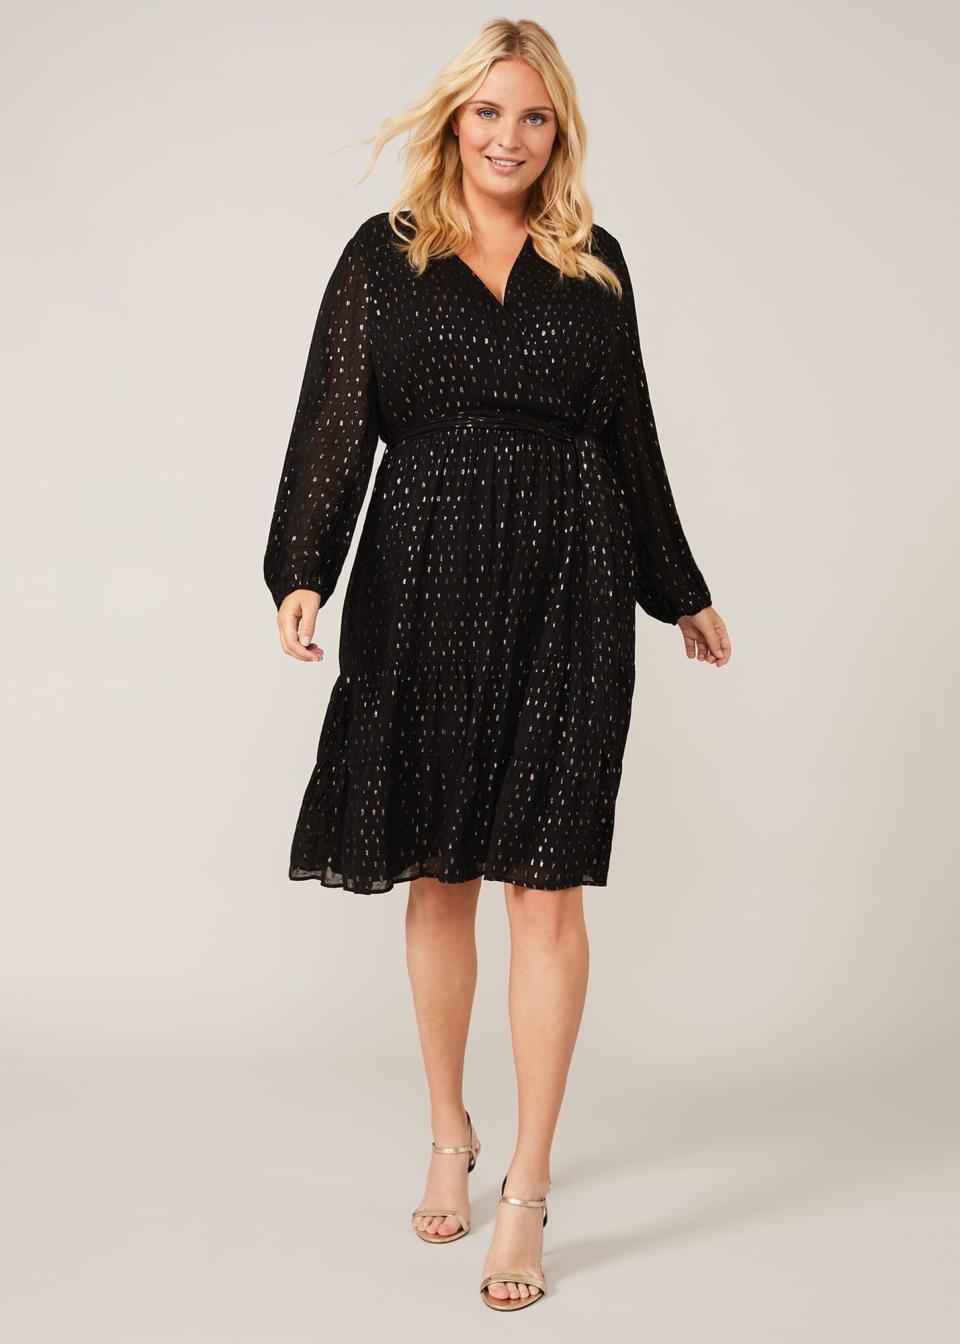 In sizes 16-26, this is a perfect party dress with a luxe foil polka print. (Phase Eight)